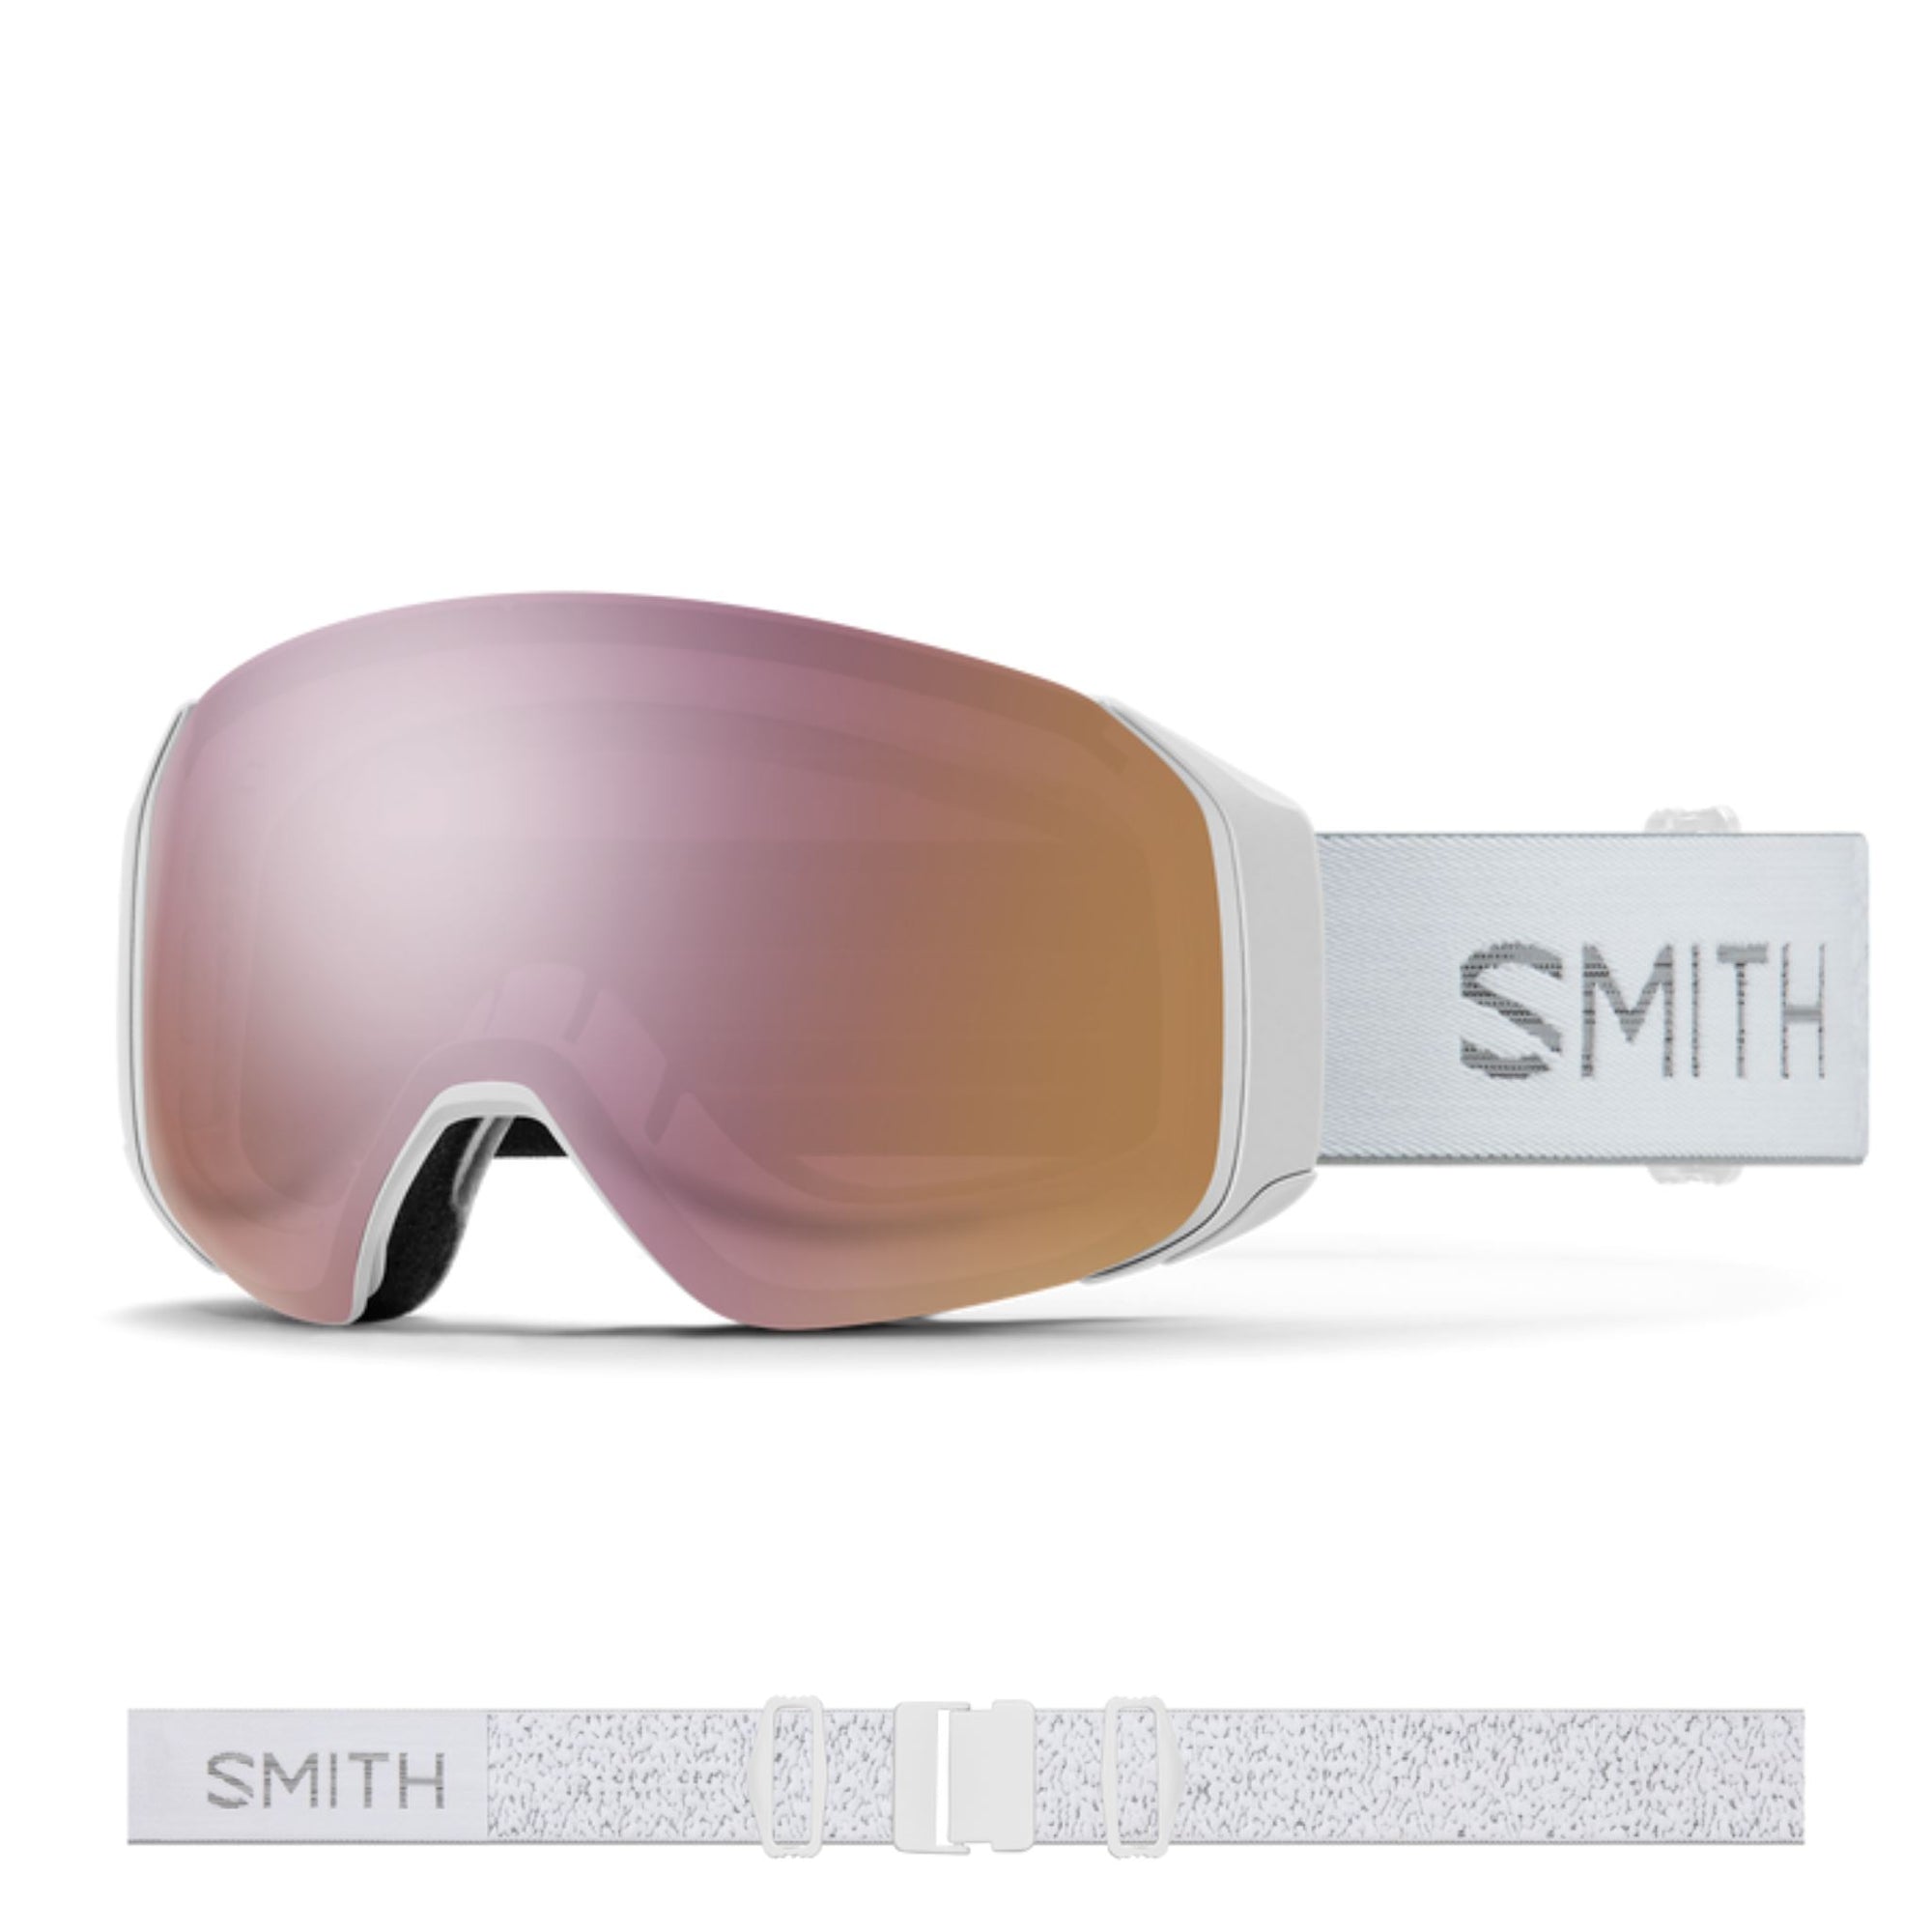 Smith 4D MAG S Goggles (Small Fit) - White Chunky Knit ChromaPop Everyday Rose Gold Mirror Goggles Smith 